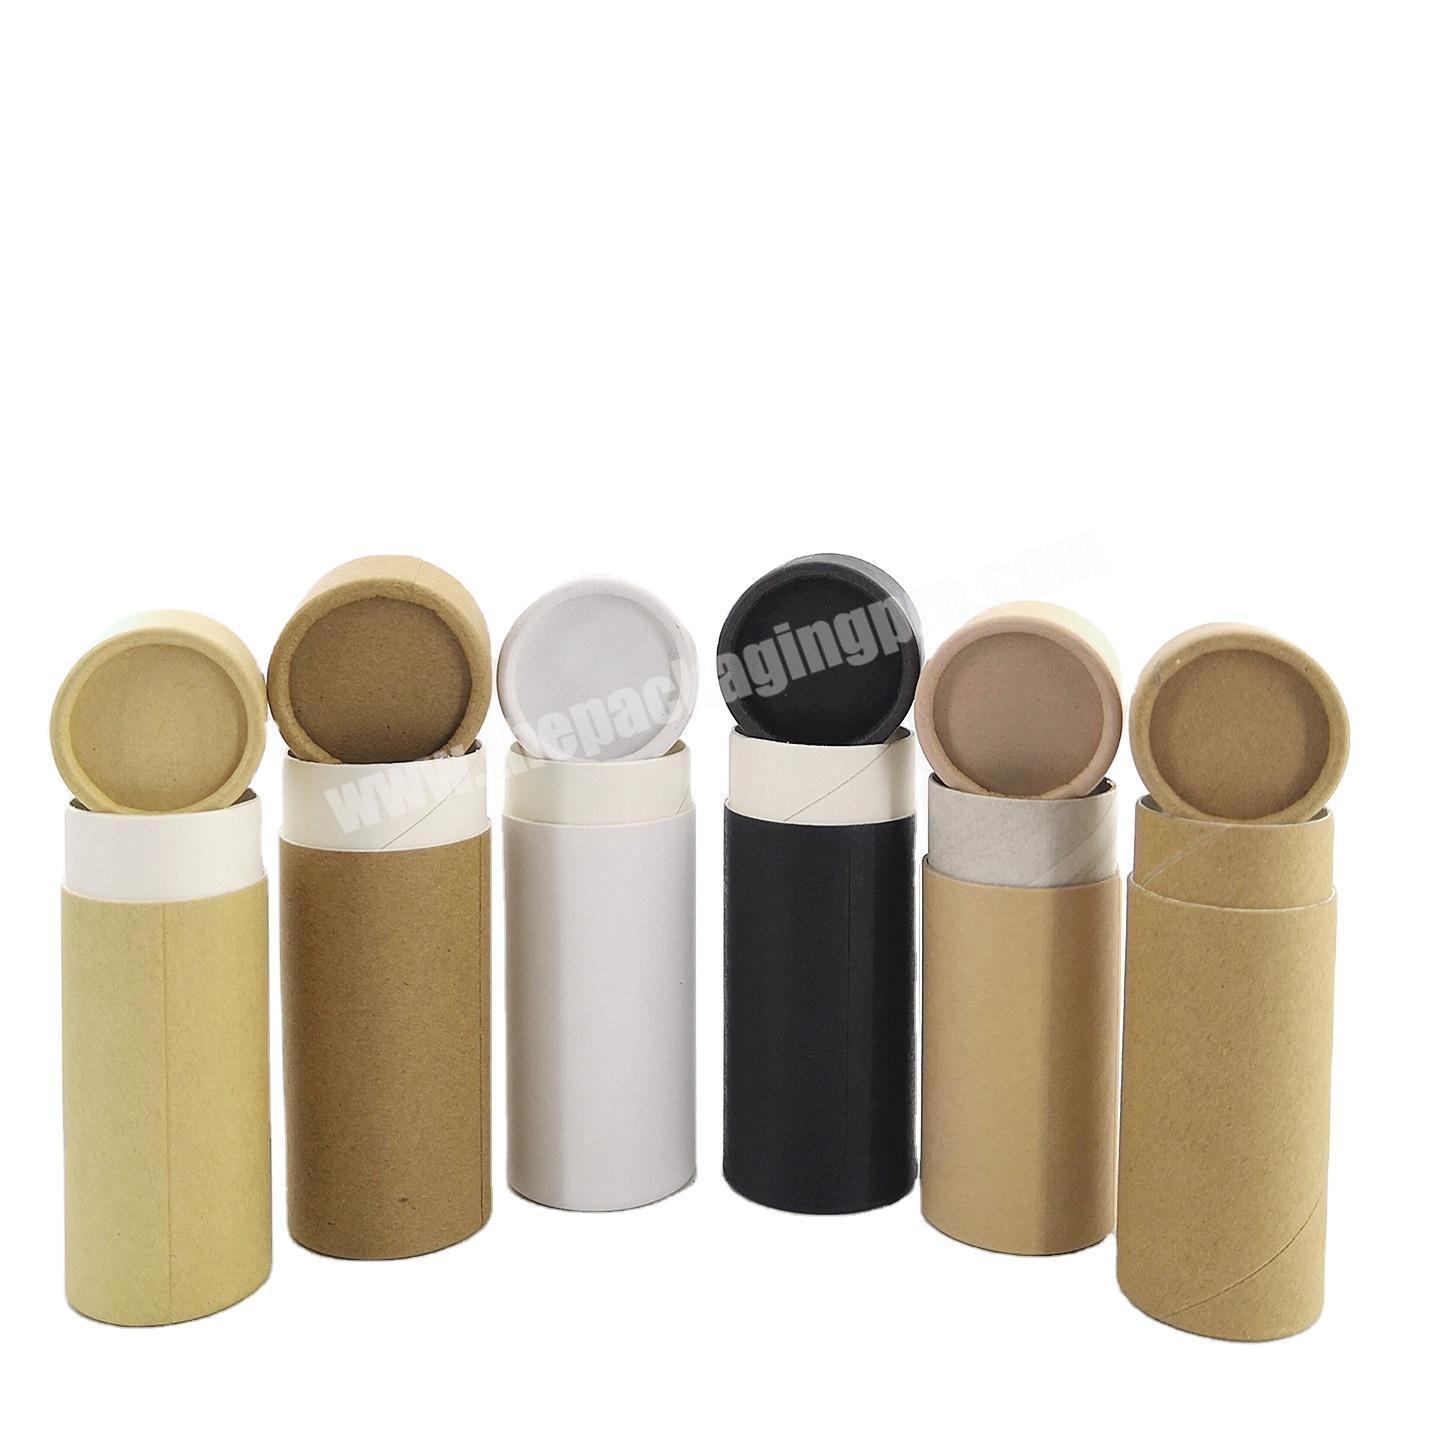 Biodegradable 0.5oz 14g fast delivery push up lip balm tubes in stock